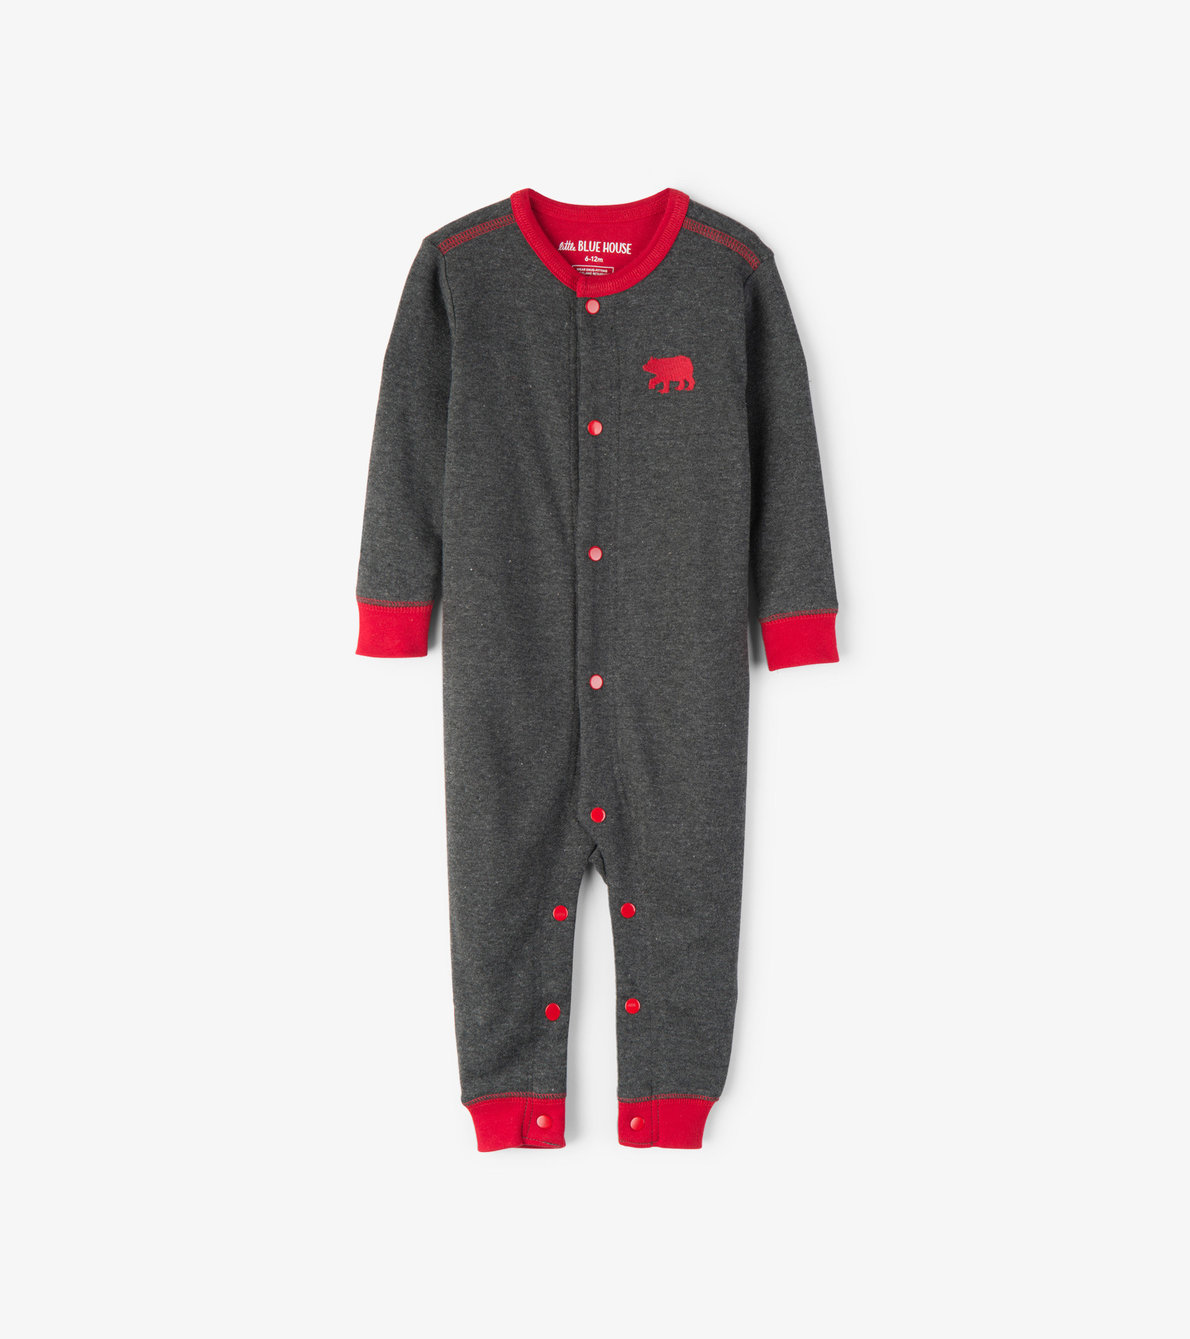 View larger image of Charcoal Bear Naked Baby Union Suit